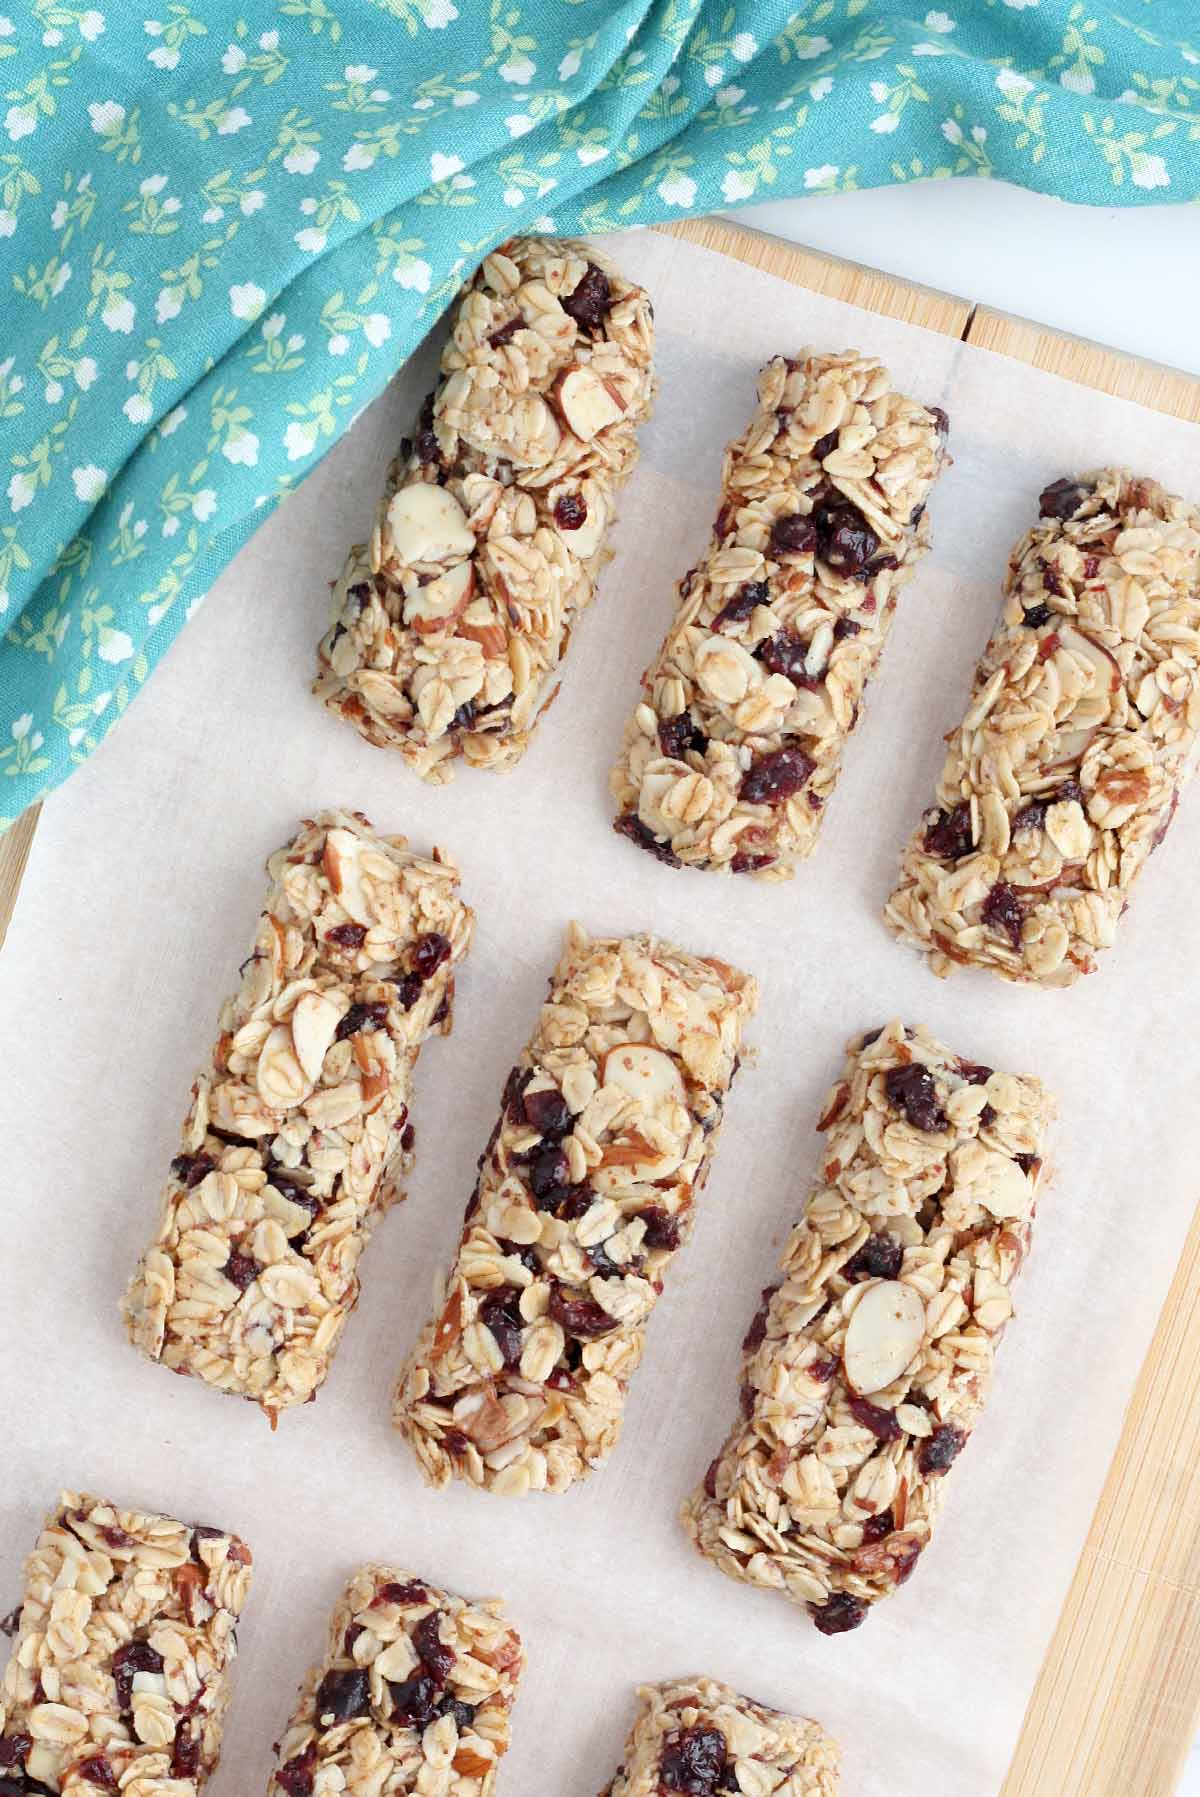 oatmeal bars lined up on parchment paper with a blue floral dish towel